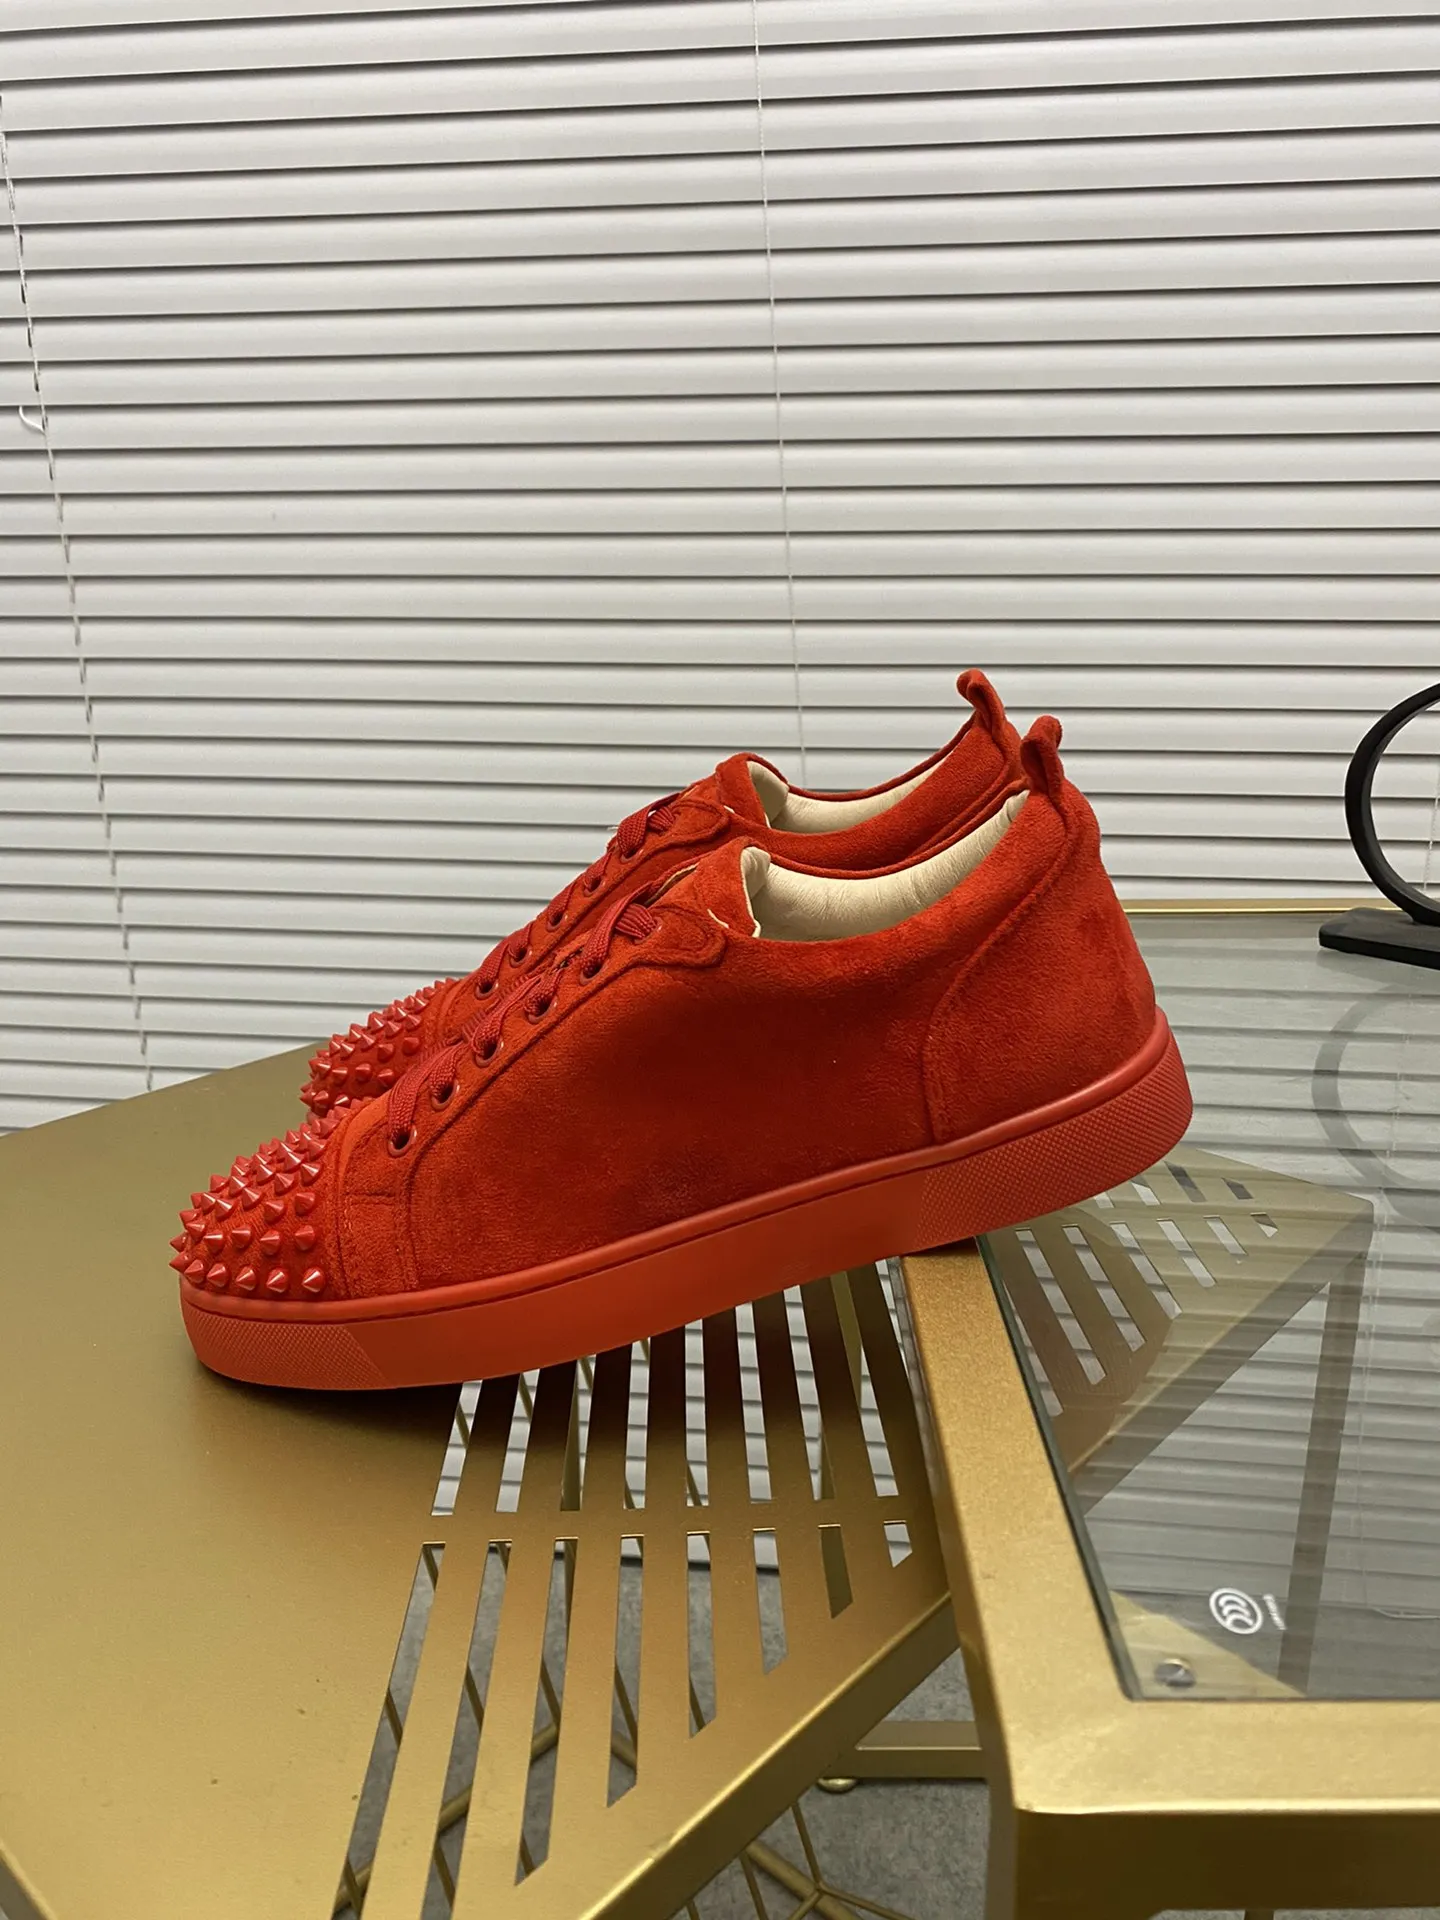 

CL Brand Louis Junior Spikes Rivets Shoes Men's And Women's Fashion Designer Personalized Red Bottom Casual Sneakers zapatos